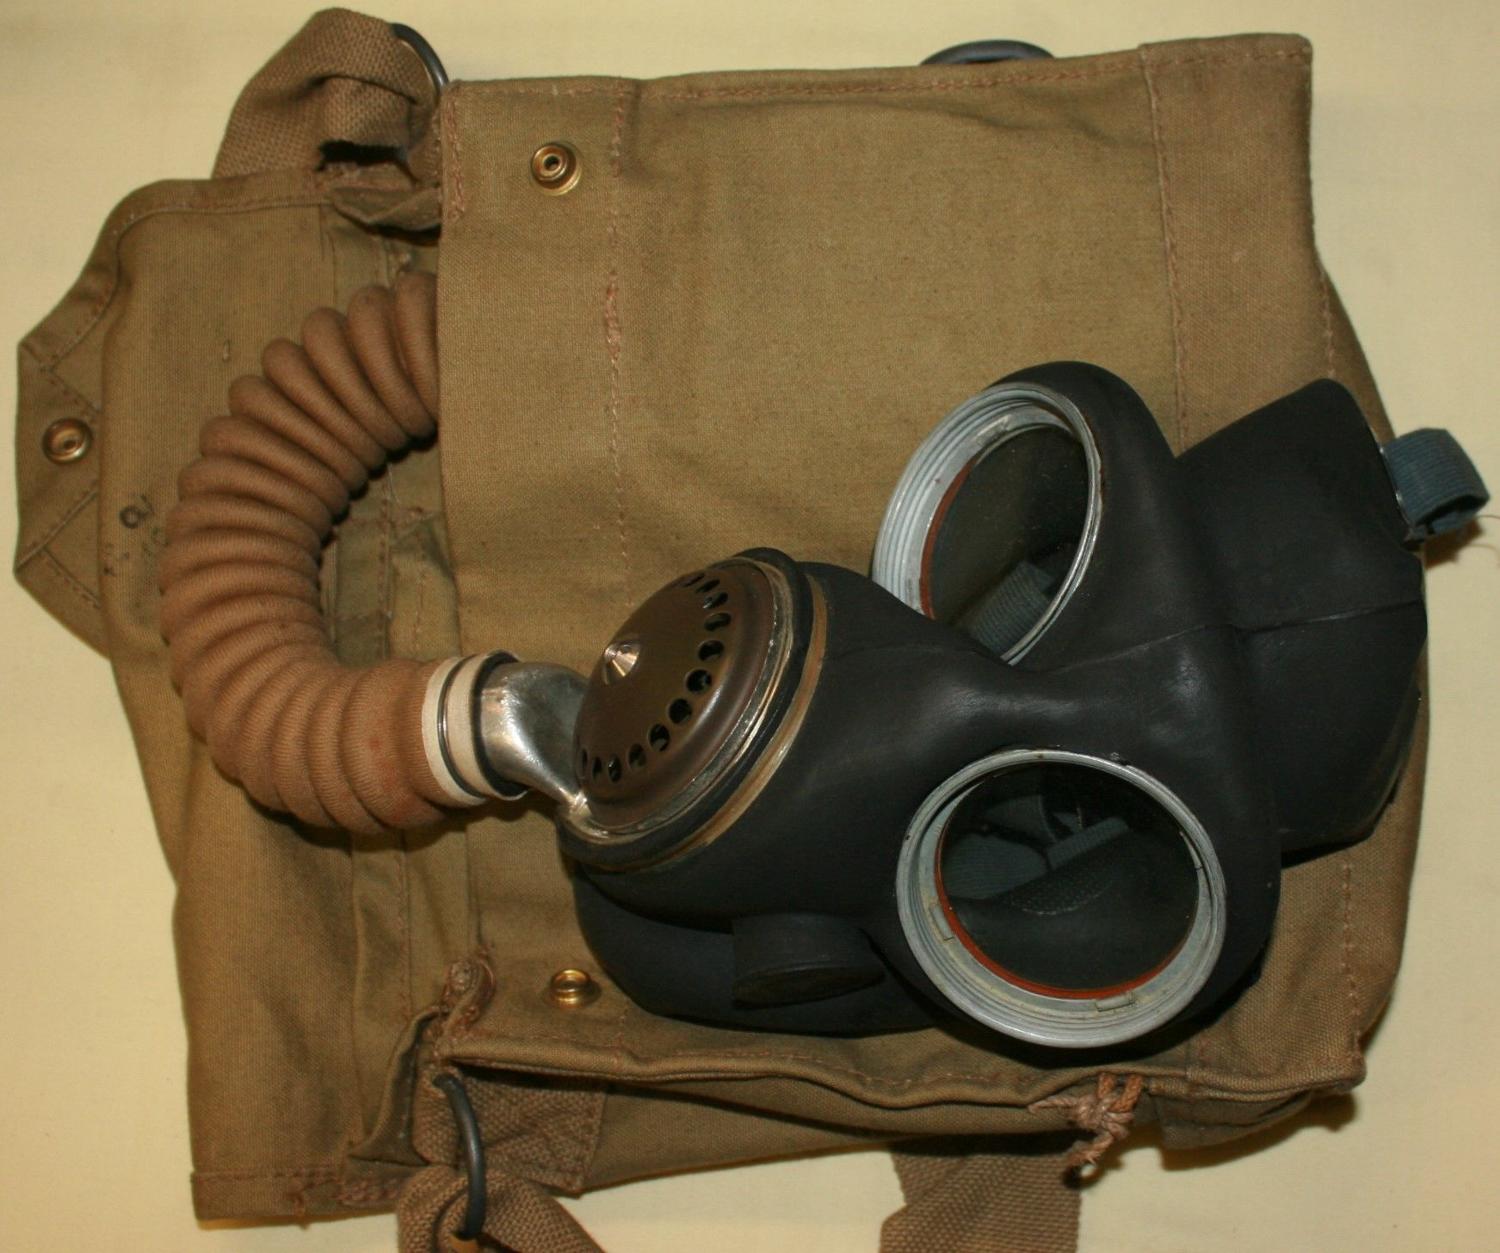 A VERY GOOD CONDITION 1942 DATED BRITISH GAS MASK